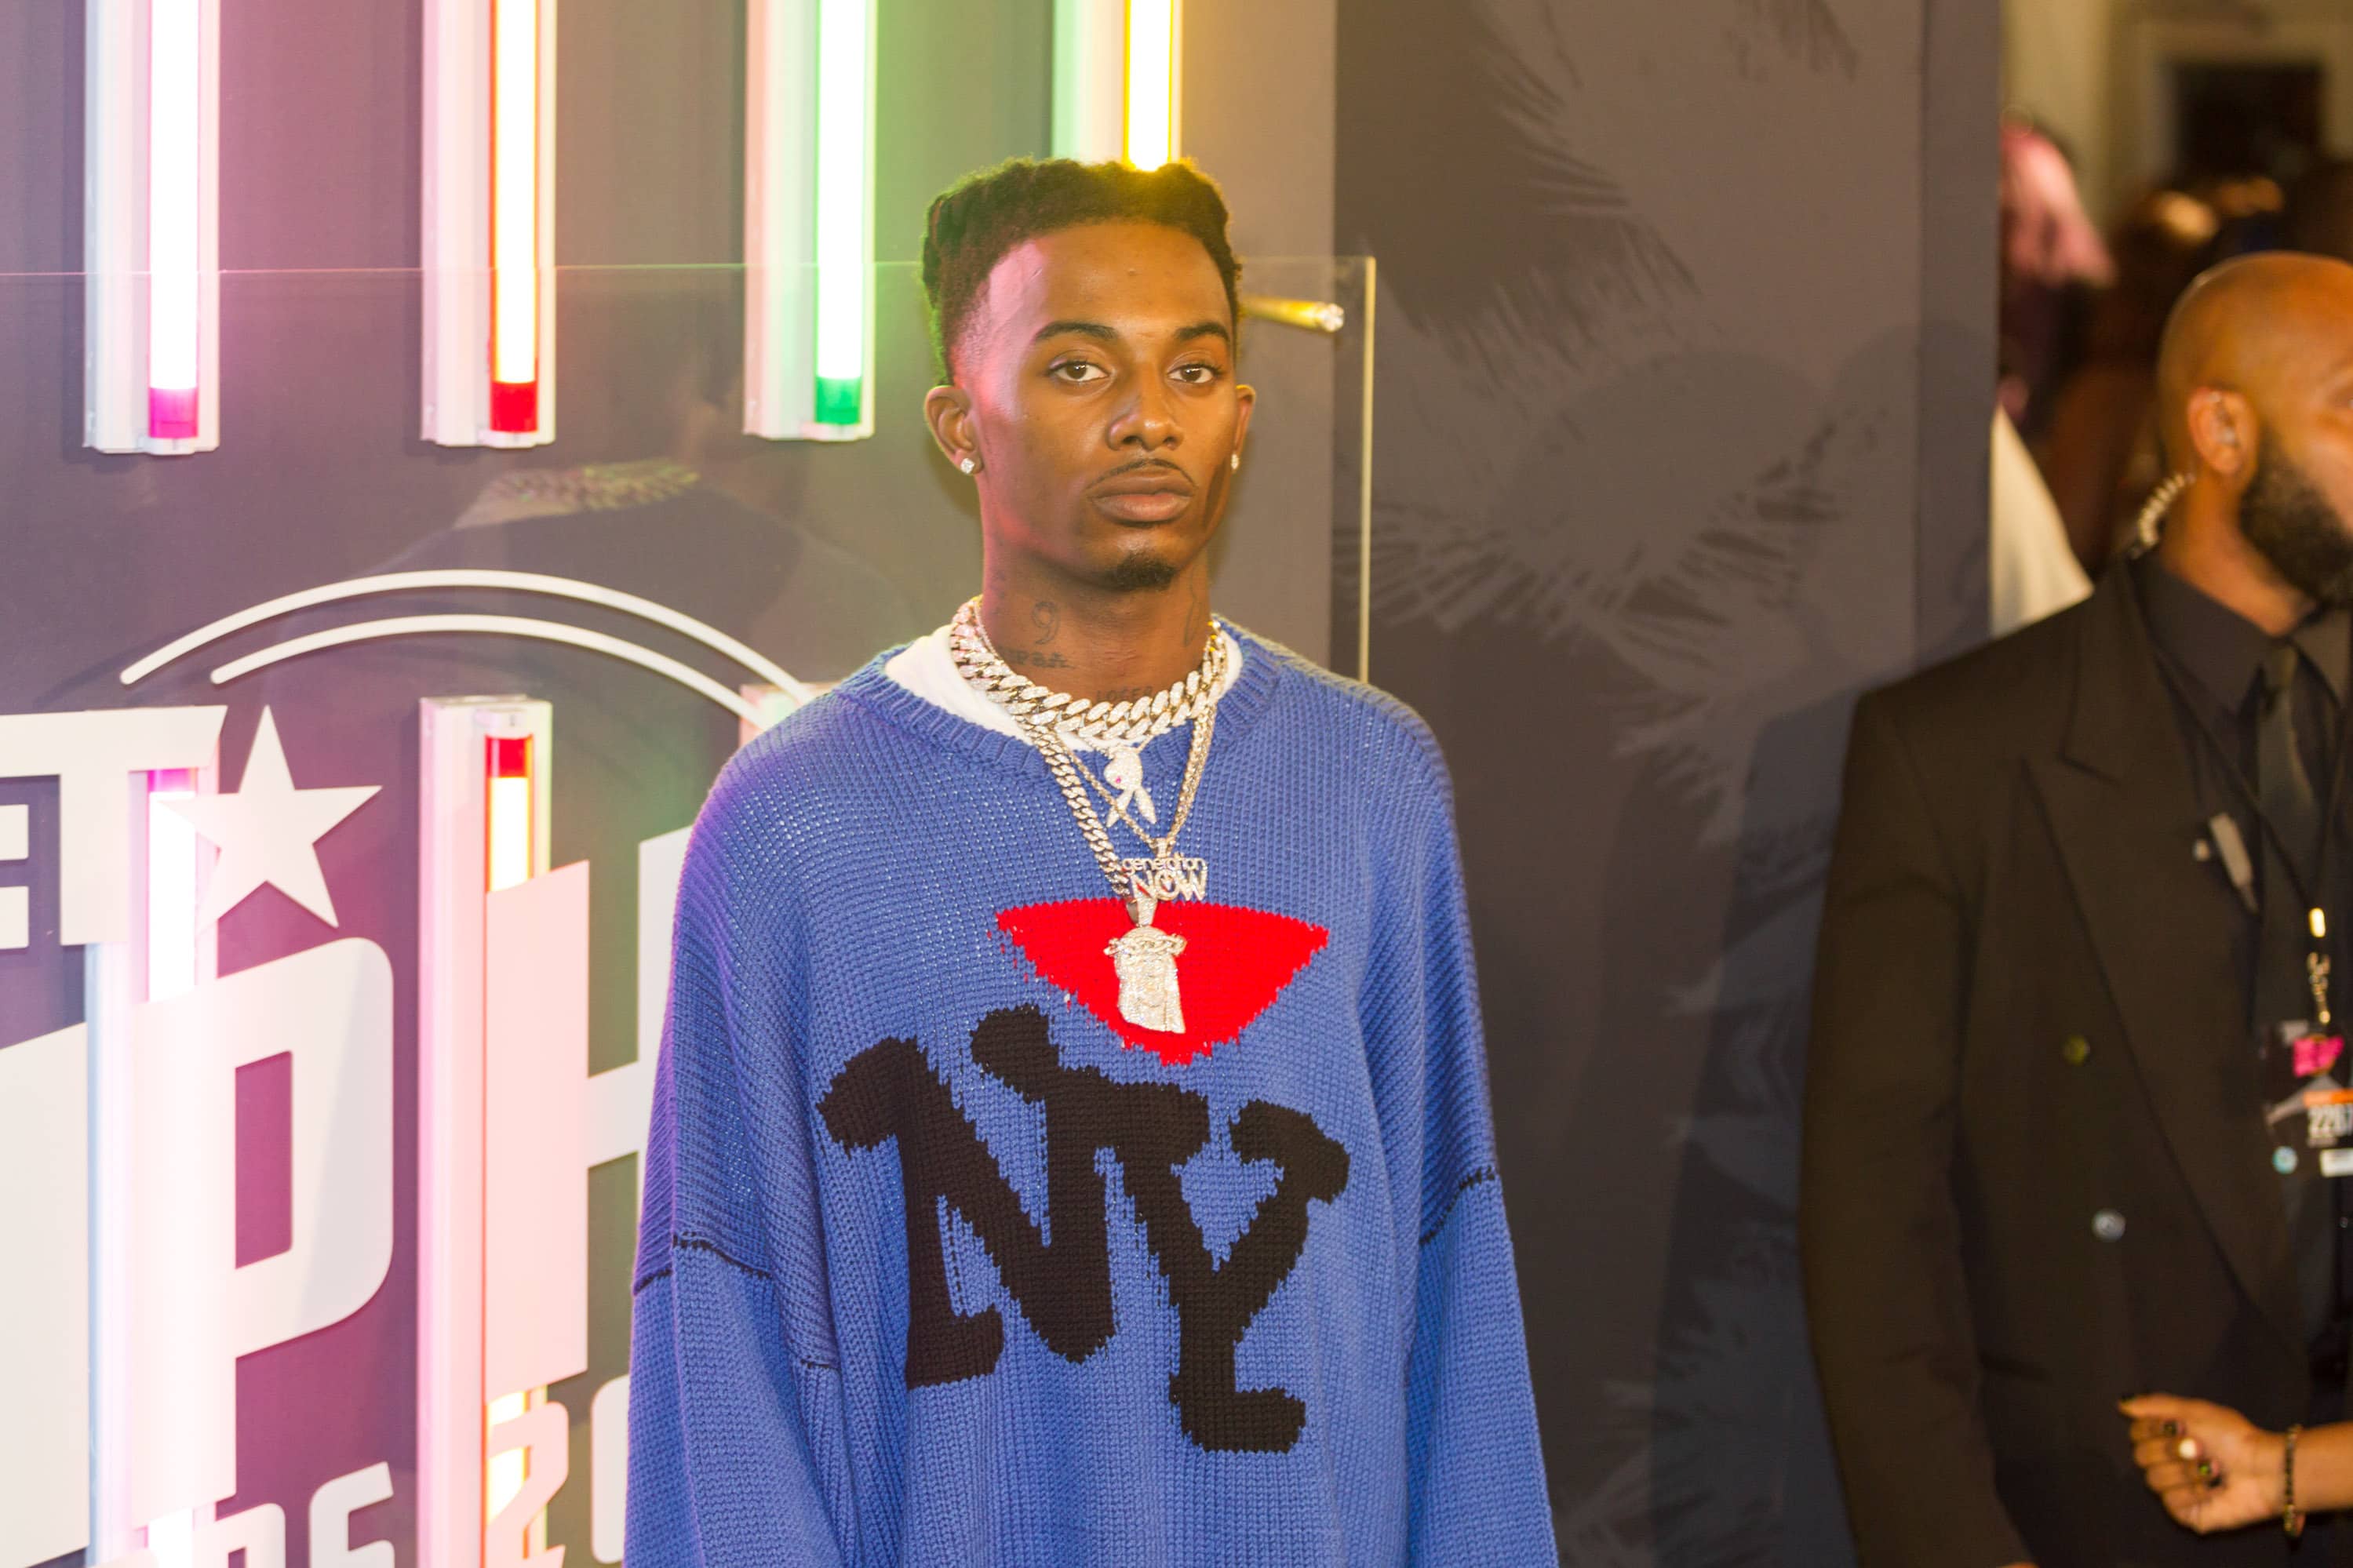 Playboi Carti opens up about his sexuality: ‘I am myself’